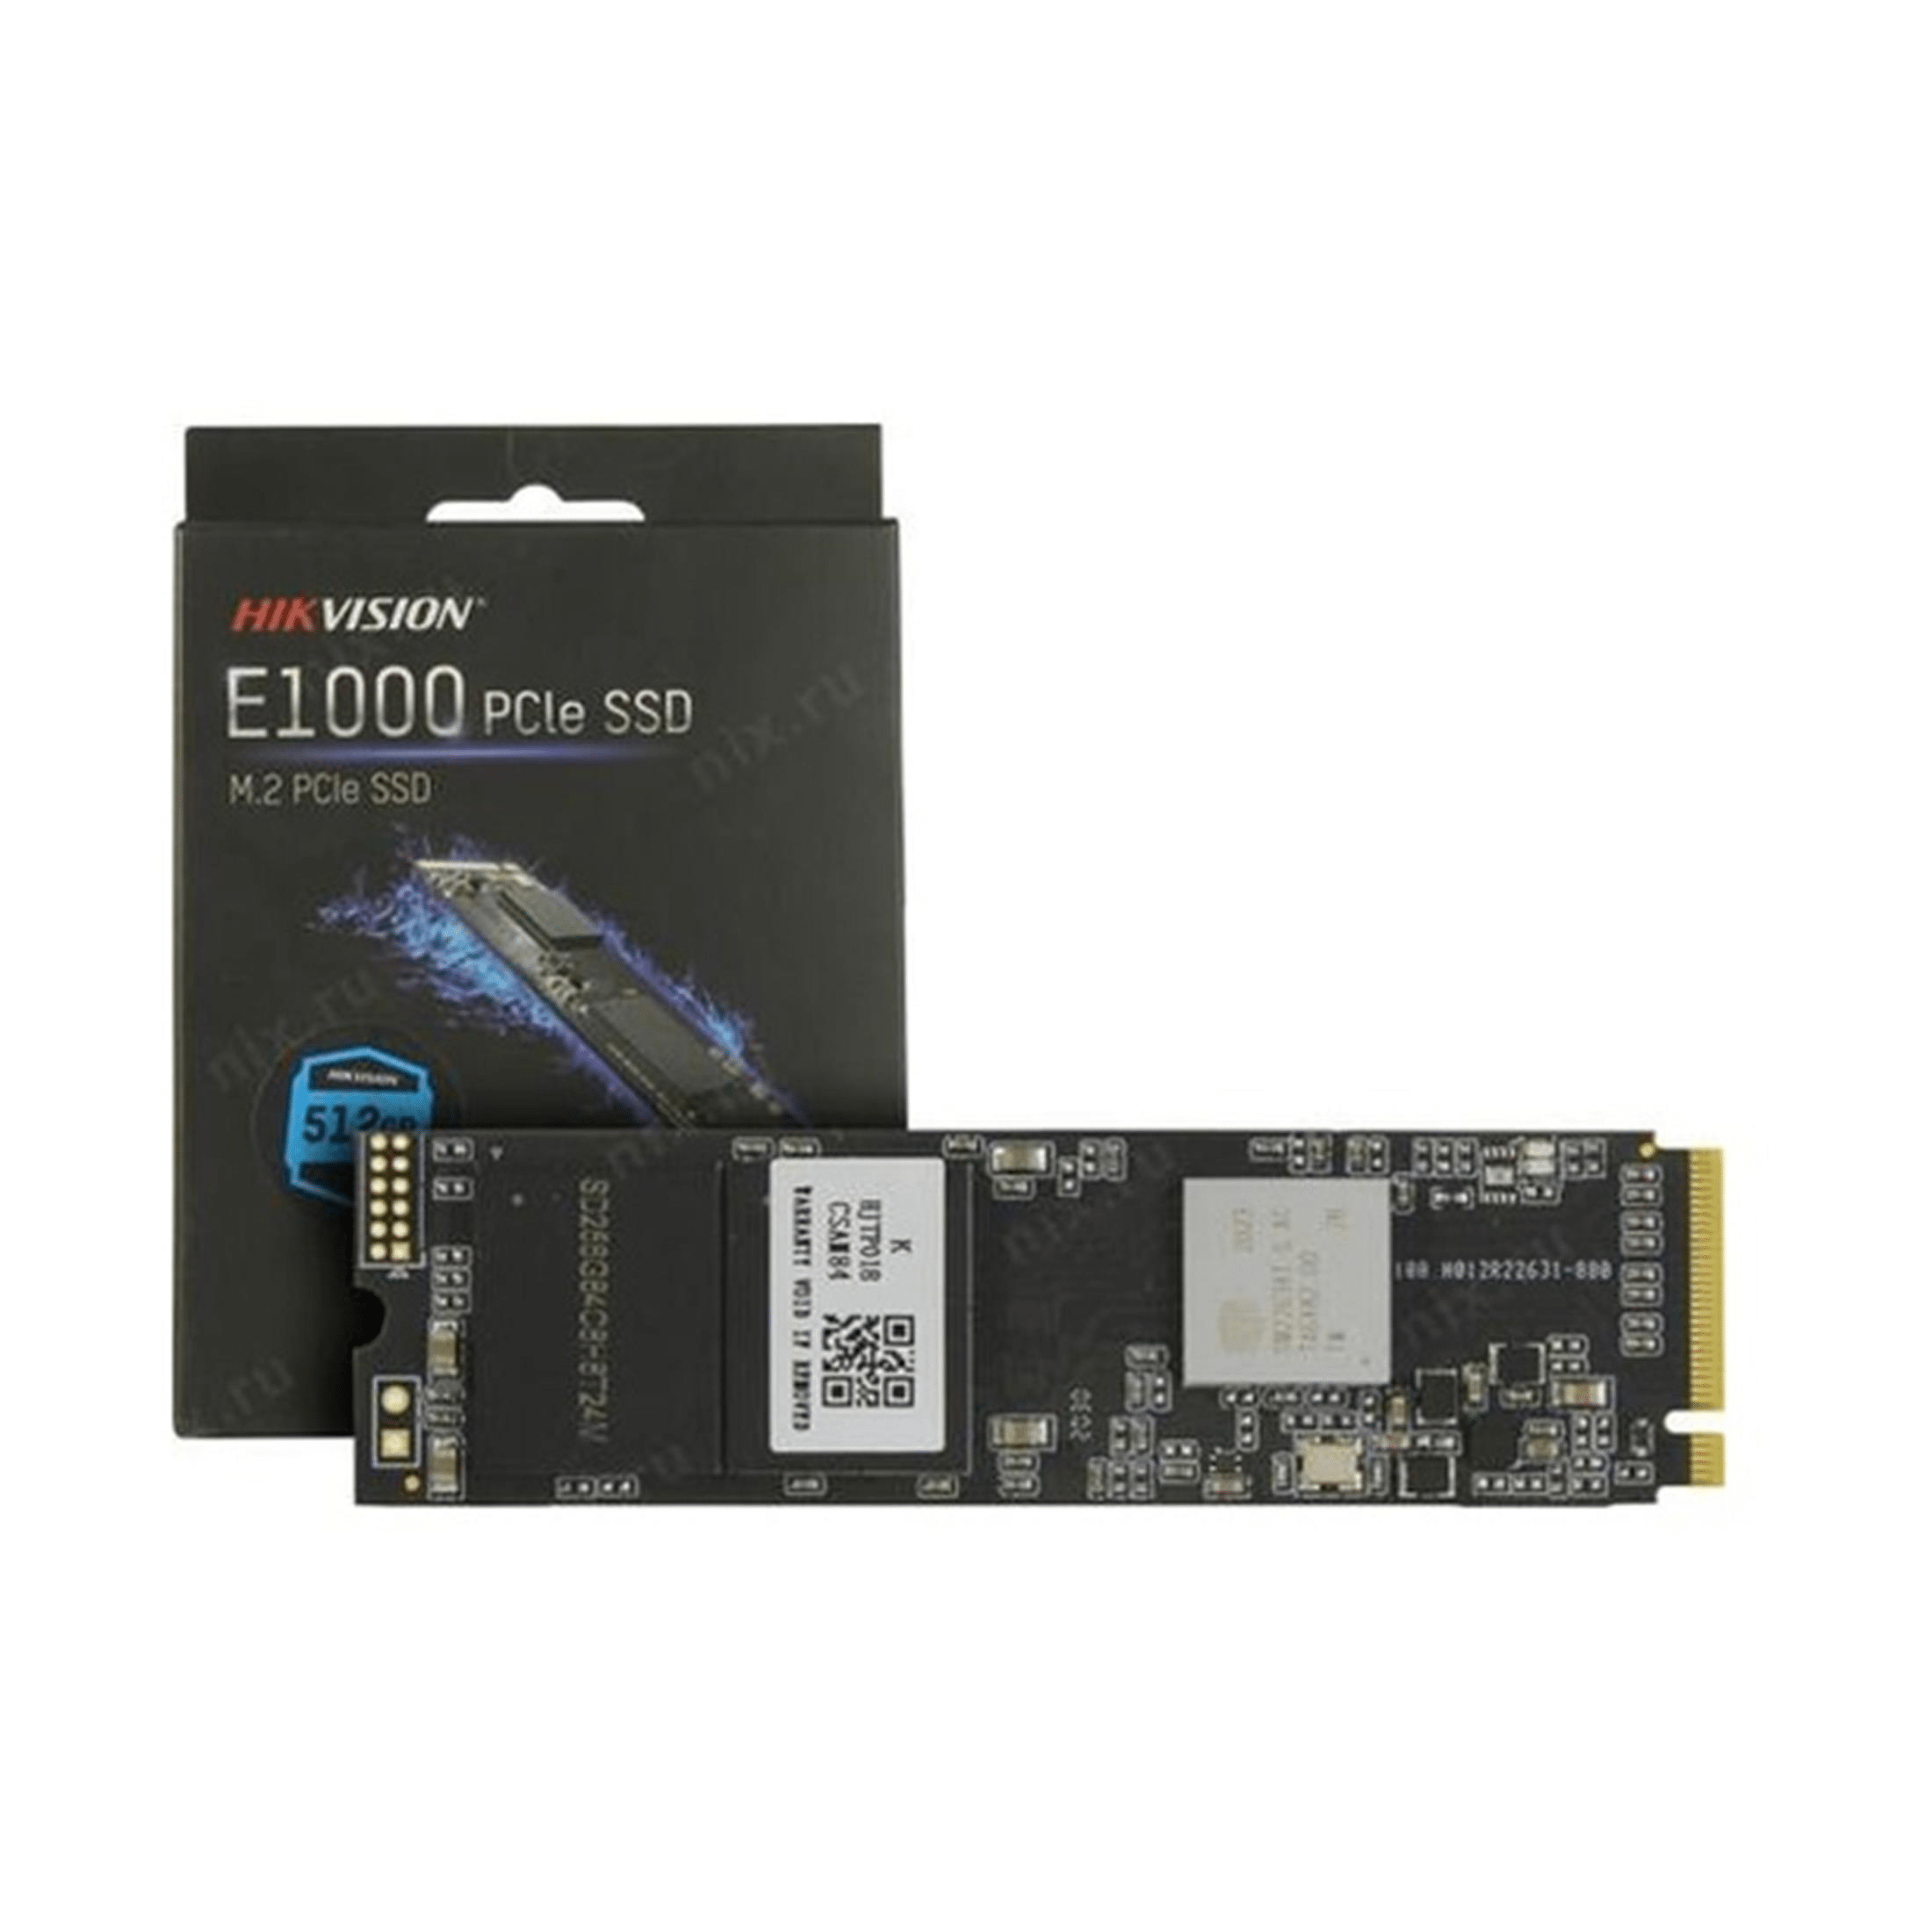 HIKVISION 512GB Internal E100 Solid State Drive (SSD)